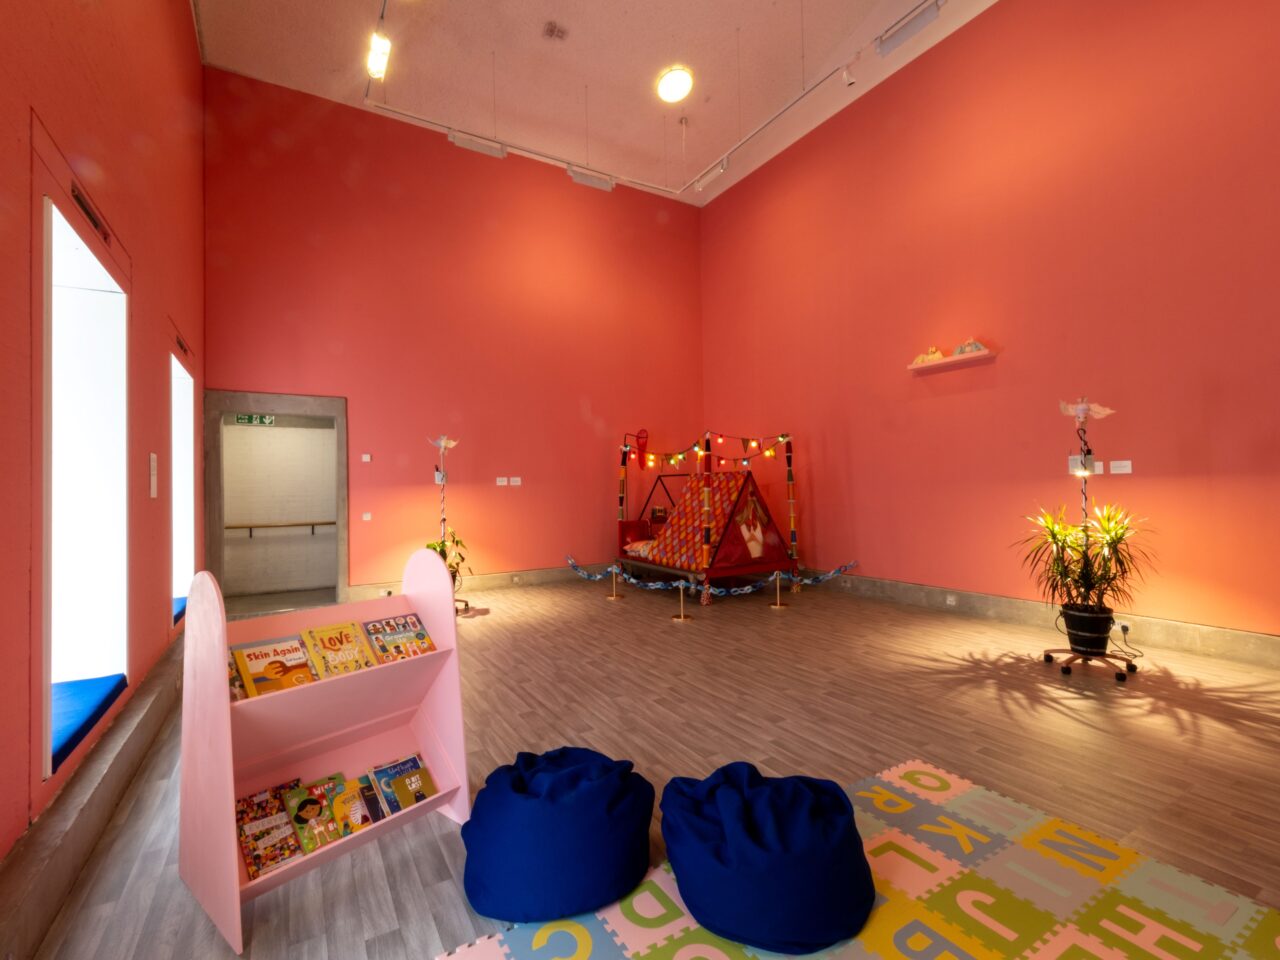 An installation including plants, hand-sewn pastel-coloured bats, both hanging and on a shelf. There is a space with blue beanbags and a foam floor. In the corner is a colourful tent, that is mostly red and has colourful lights hanging above it